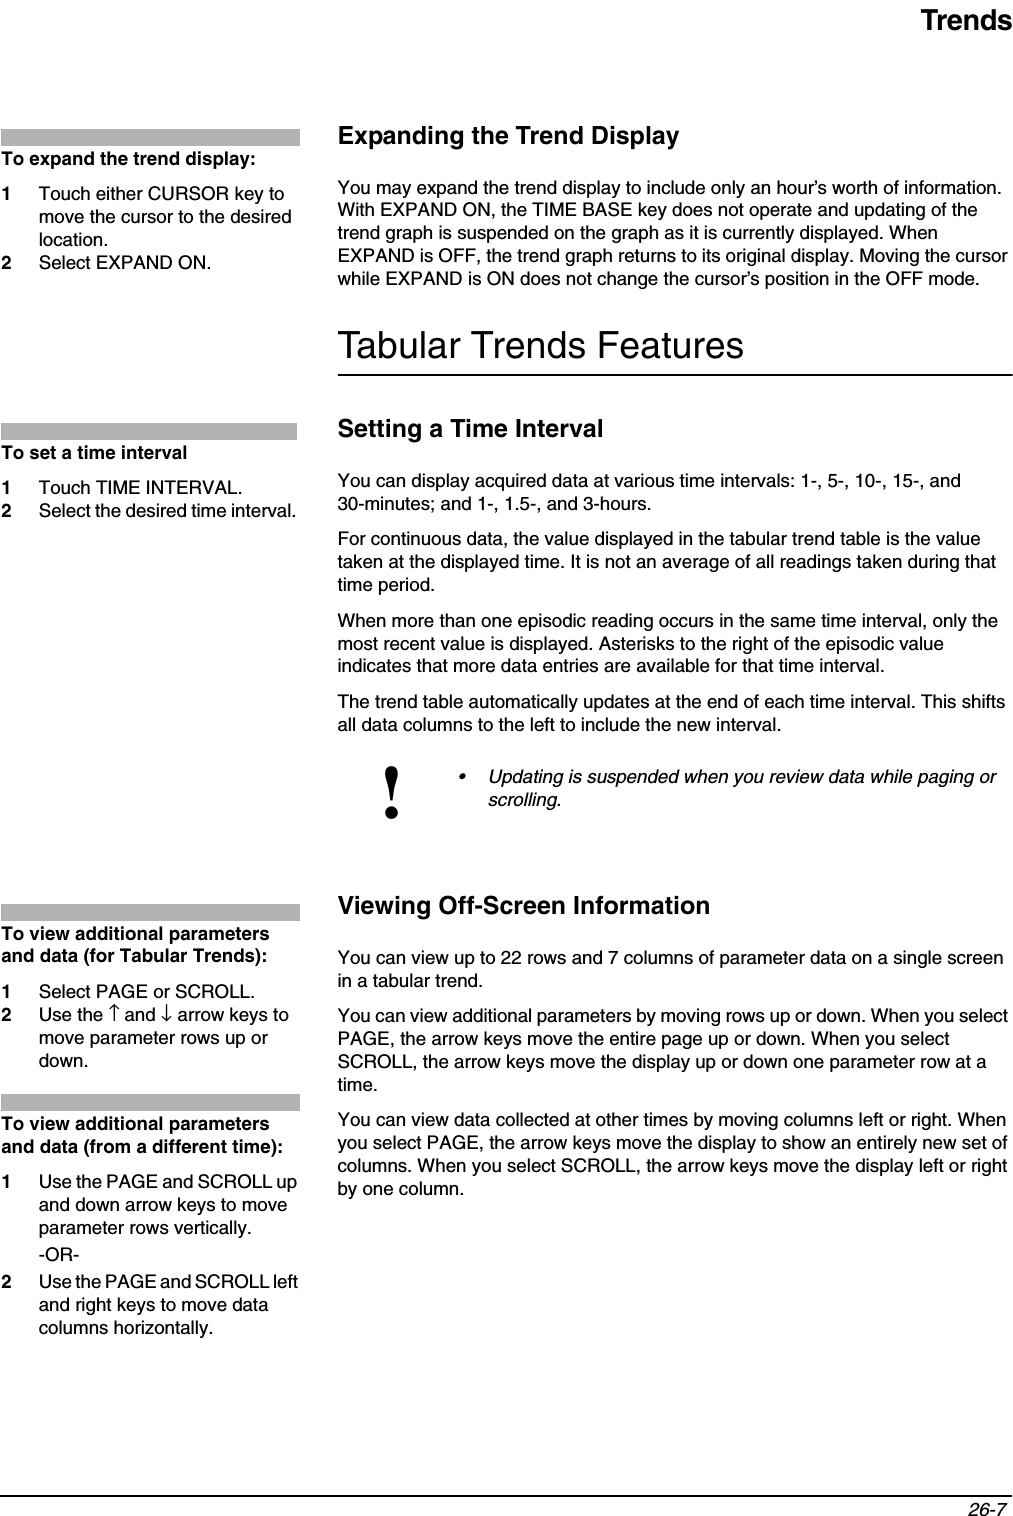 Trends26-7 Expanding the Trend DisplayYou may expand the trend display to include only an hour’s worth of information. With EXPAND ON, the TIME BASE key does not operate and updating of the trend graph is suspended on the graph as it is currently displayed. When EXPAND is OFF, the trend graph returns to its original display. Moving the cursor while EXPAND is ON does not change the cursor’s position in the OFF mode.Tabular Trends FeaturesSetting a Time IntervalYou can display acquired data at various time intervals: 1-, 5-, 10-, 15-, and 30-minutes; and 1-, 1.5-, and 3-hours.For continuous data, the value displayed in the tabular trend table is the value taken at the displayed time. It is not an average of all readings taken during that time period.When more than one episodic reading occurs in the same time interval, only the most recent value is displayed. Asterisks to the right of the episodic value indicates that more data entries are available for that time interval.The trend table automatically updates at the end of each time interval. This shifts all data columns to the left to include the new interval.Viewing Off-Screen InformationYou can view up to 22 rows and 7 columns of parameter data on a single screen in a tabular trend.You can view additional parameters by moving rows up or down. When you select PAGE, the arrow keys move the entire page up or down. When you select SCROLL, the arrow keys move the display up or down one parameter row at a time.You can view data collected at other times by moving columns left or right. When you select PAGE, the arrow keys move the display to show an entirely new set of columns. When you select SCROLL, the arrow keys move the display left or right by one column.!• Updating is suspended when you review data while paging or scrolling.To expand the trend display:1Touch either CURSOR key to move the cursor to the desired location.2Select EXPAND ON.To set a time interval1Touch TIME INTERVAL.2Select the desired time interval.To view additional parameters and data (for Tabular Trends):1Select PAGE or SCROLL. 2Use the ↑ and ↓ arrow keys to move parameter rows up or down.To view additional parameters and data (from a different time):1Use the PAGE and SCROLL up and down arrow keys to move parameter rows vertically.-OR-2Use the PAGE and SCROLL left and right keys to move data columns horizontally.